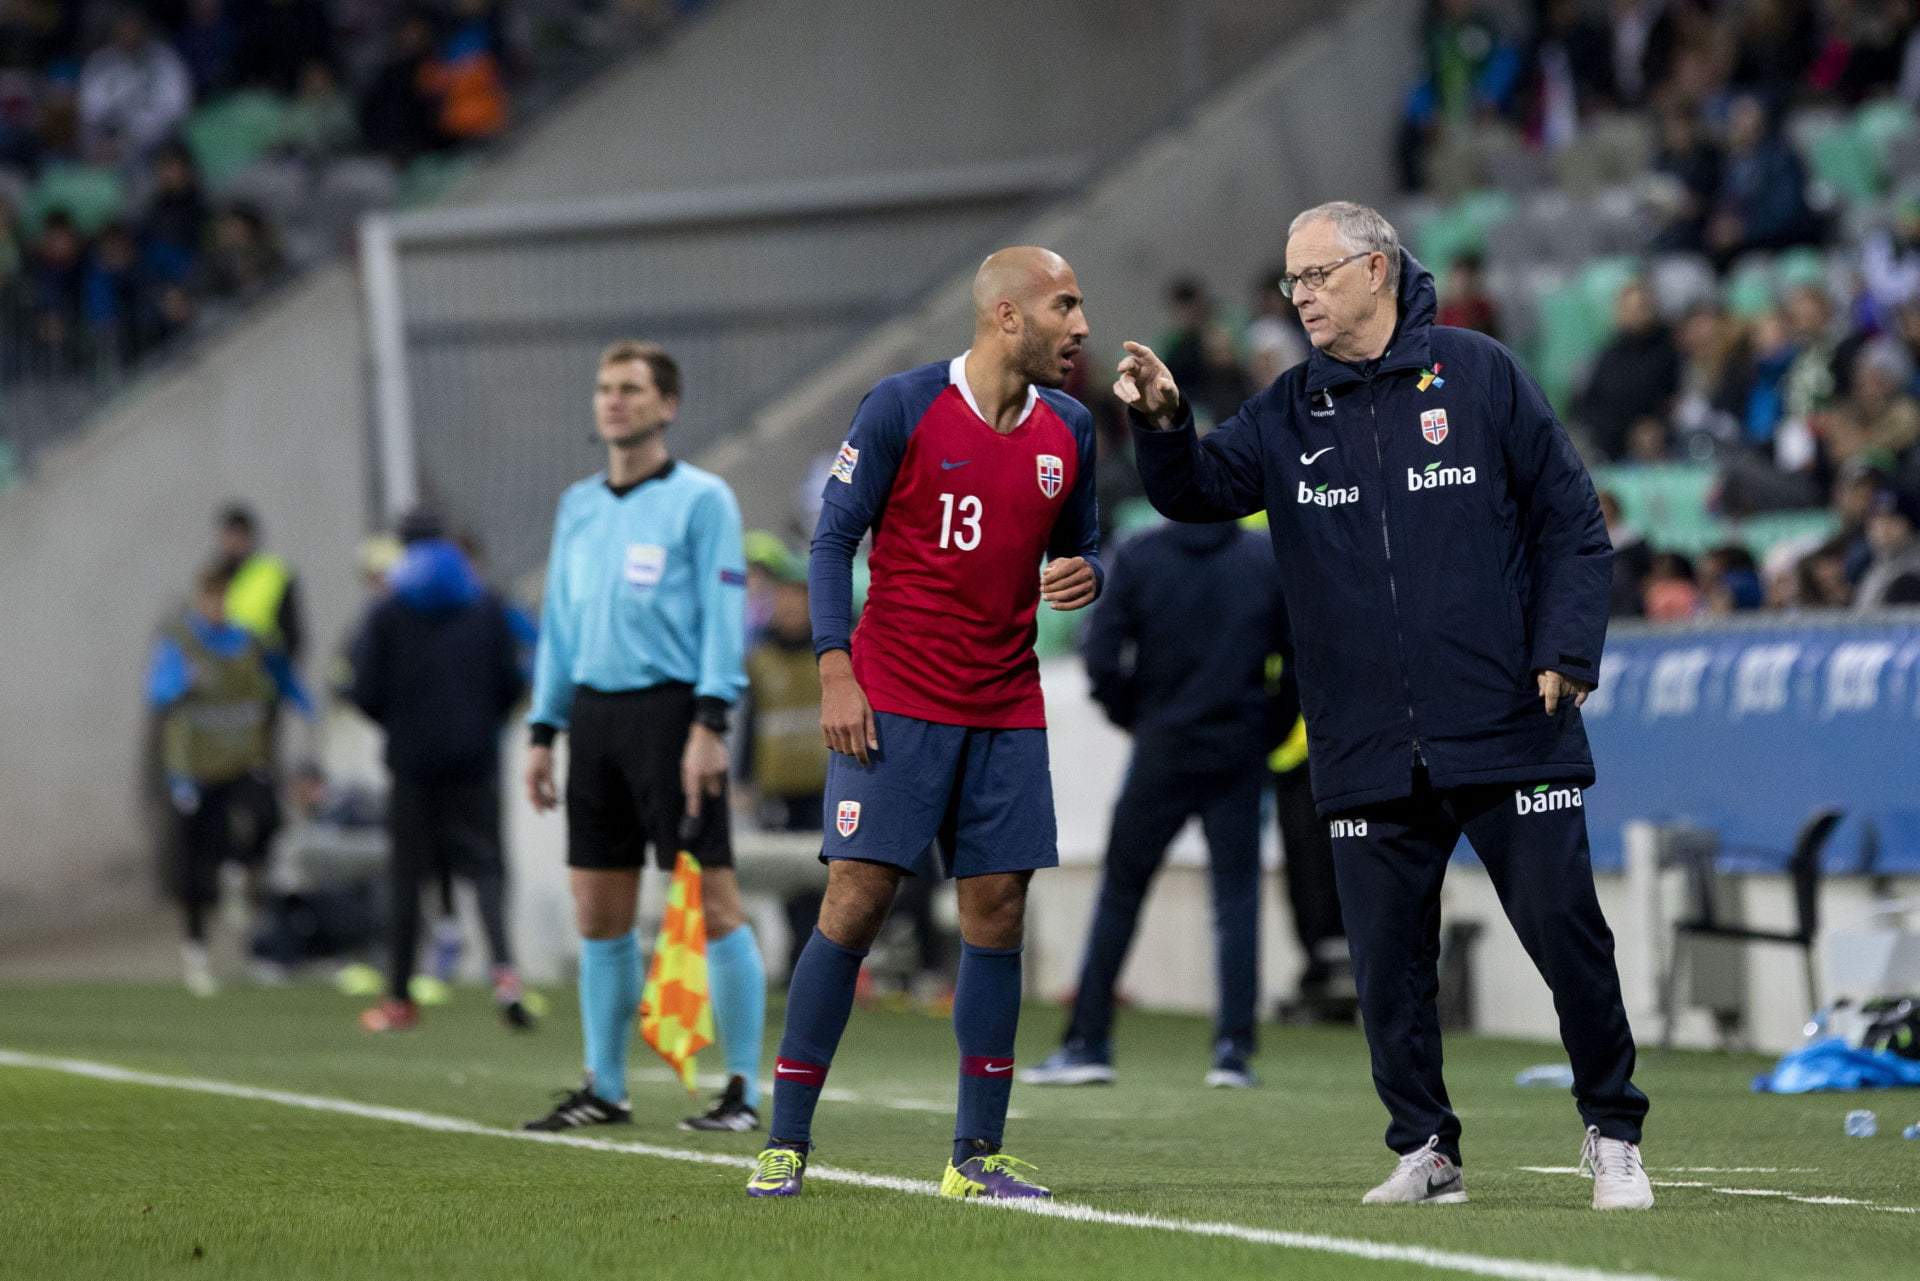 16.11.2018, Ljubljana, SLO, UEFA Nations League, Slowenien vs Norwegen, Liga C, Gruppe 3, im Bild Haitam Aleesami of Norway and Lars Lagerback, head coach of Norway // during the Nations League, League C, Group 3 match between Slovenia and Norway at the Ljubljana, Slovenia on 2018/11/16. EXPA Pictures © 2018, PhotoCredit: EXPA/ Sportida/ Urban Urbanc *****ATTENTION - OUT of SLO, FRA***** LIGA NARODOW PILKA NOZNA SEZON 2018/2019 FOT.EXPA/NEWSPIX.PL Austria, Italy, Spain, Slovenia, Serbia, Croatia, Germany, UK, USA and Sweden OUT! --- Newspix.pl *** Local Caption *** www.newspix.pl mail us: info@newspix.pl call us: 0048 022 23 22 222 --- Polish Picture Agency by Ringier Axel Springer Poland